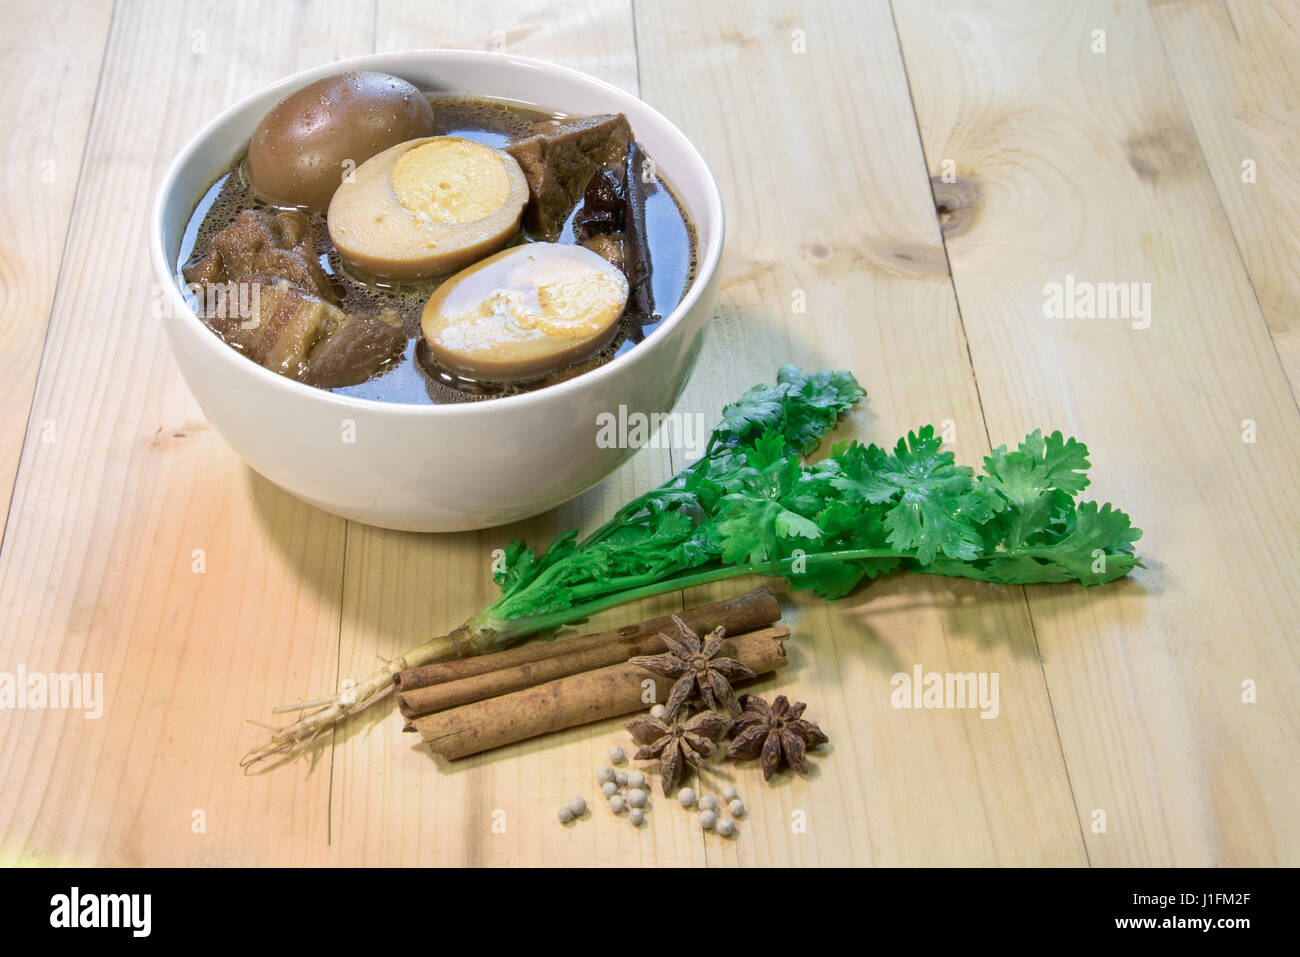 eggs with porks and tofu boiled in the gravy is delicious thaifood Stock Photo